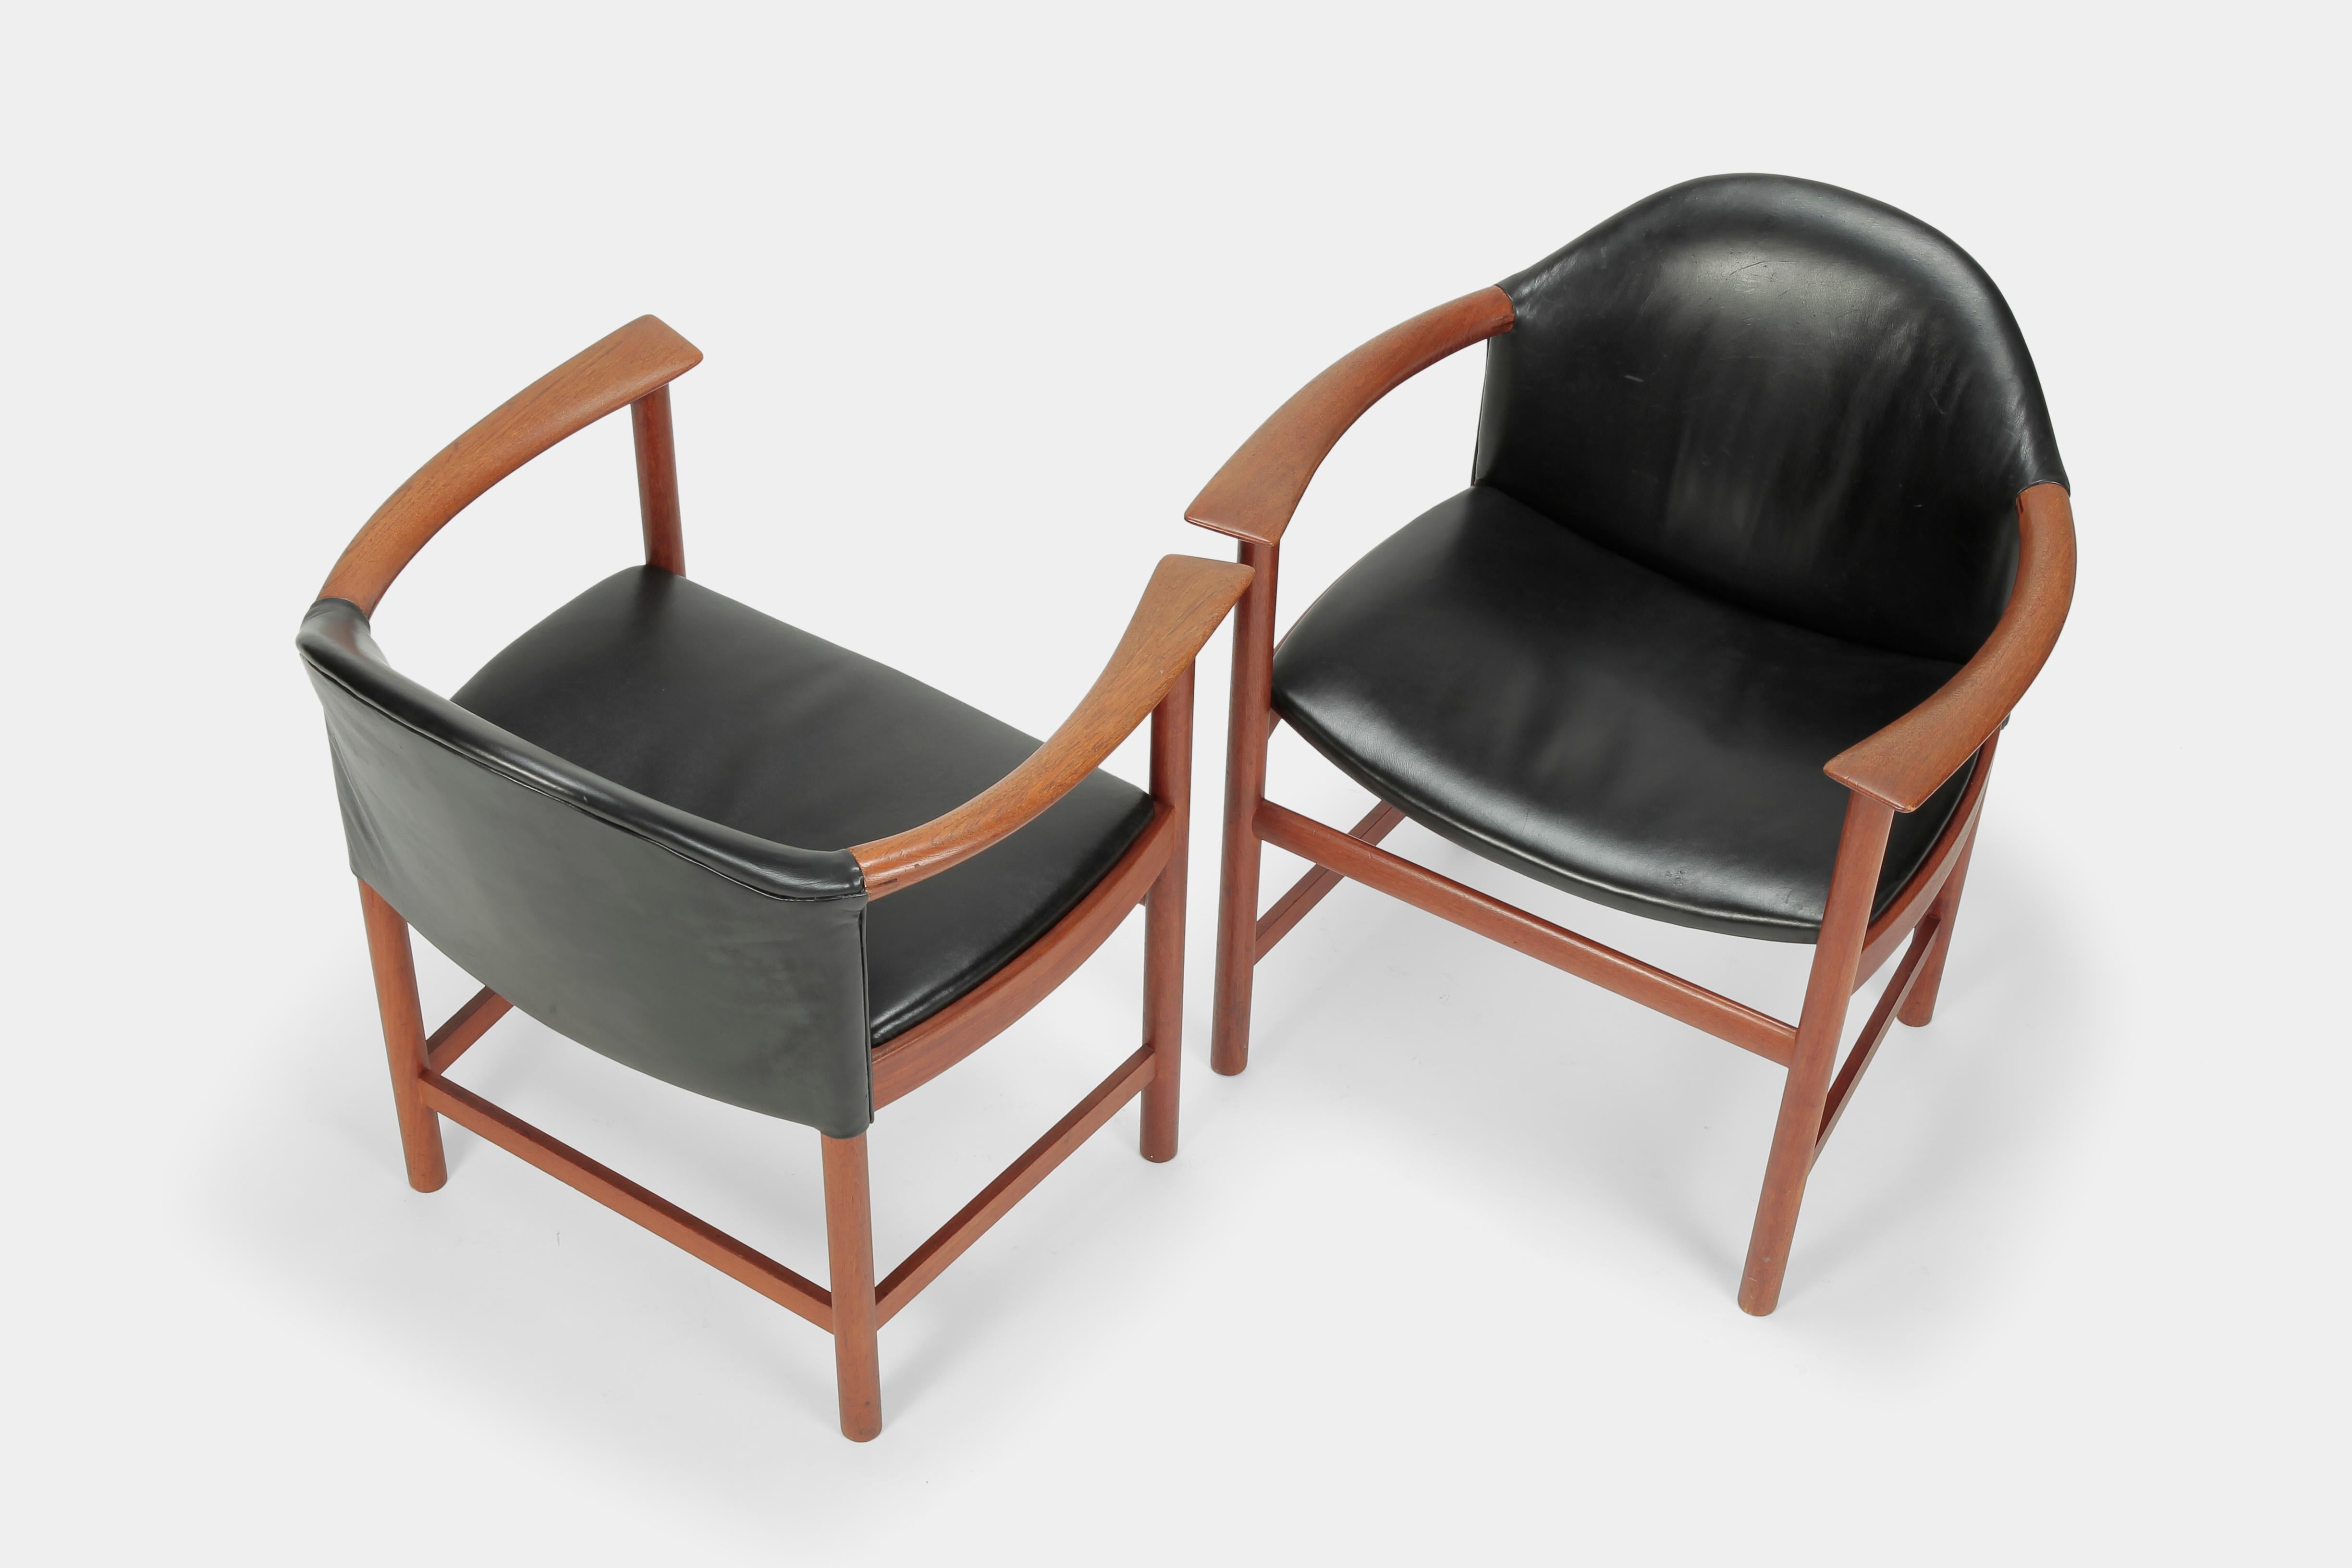 A beautiful pair of Kai Lyngfeldt Larsen armchairs made of solid teakwood frame and black leather by the company Soborg Moebler in the 1960s; model no: 508. In very nice vintage condition.